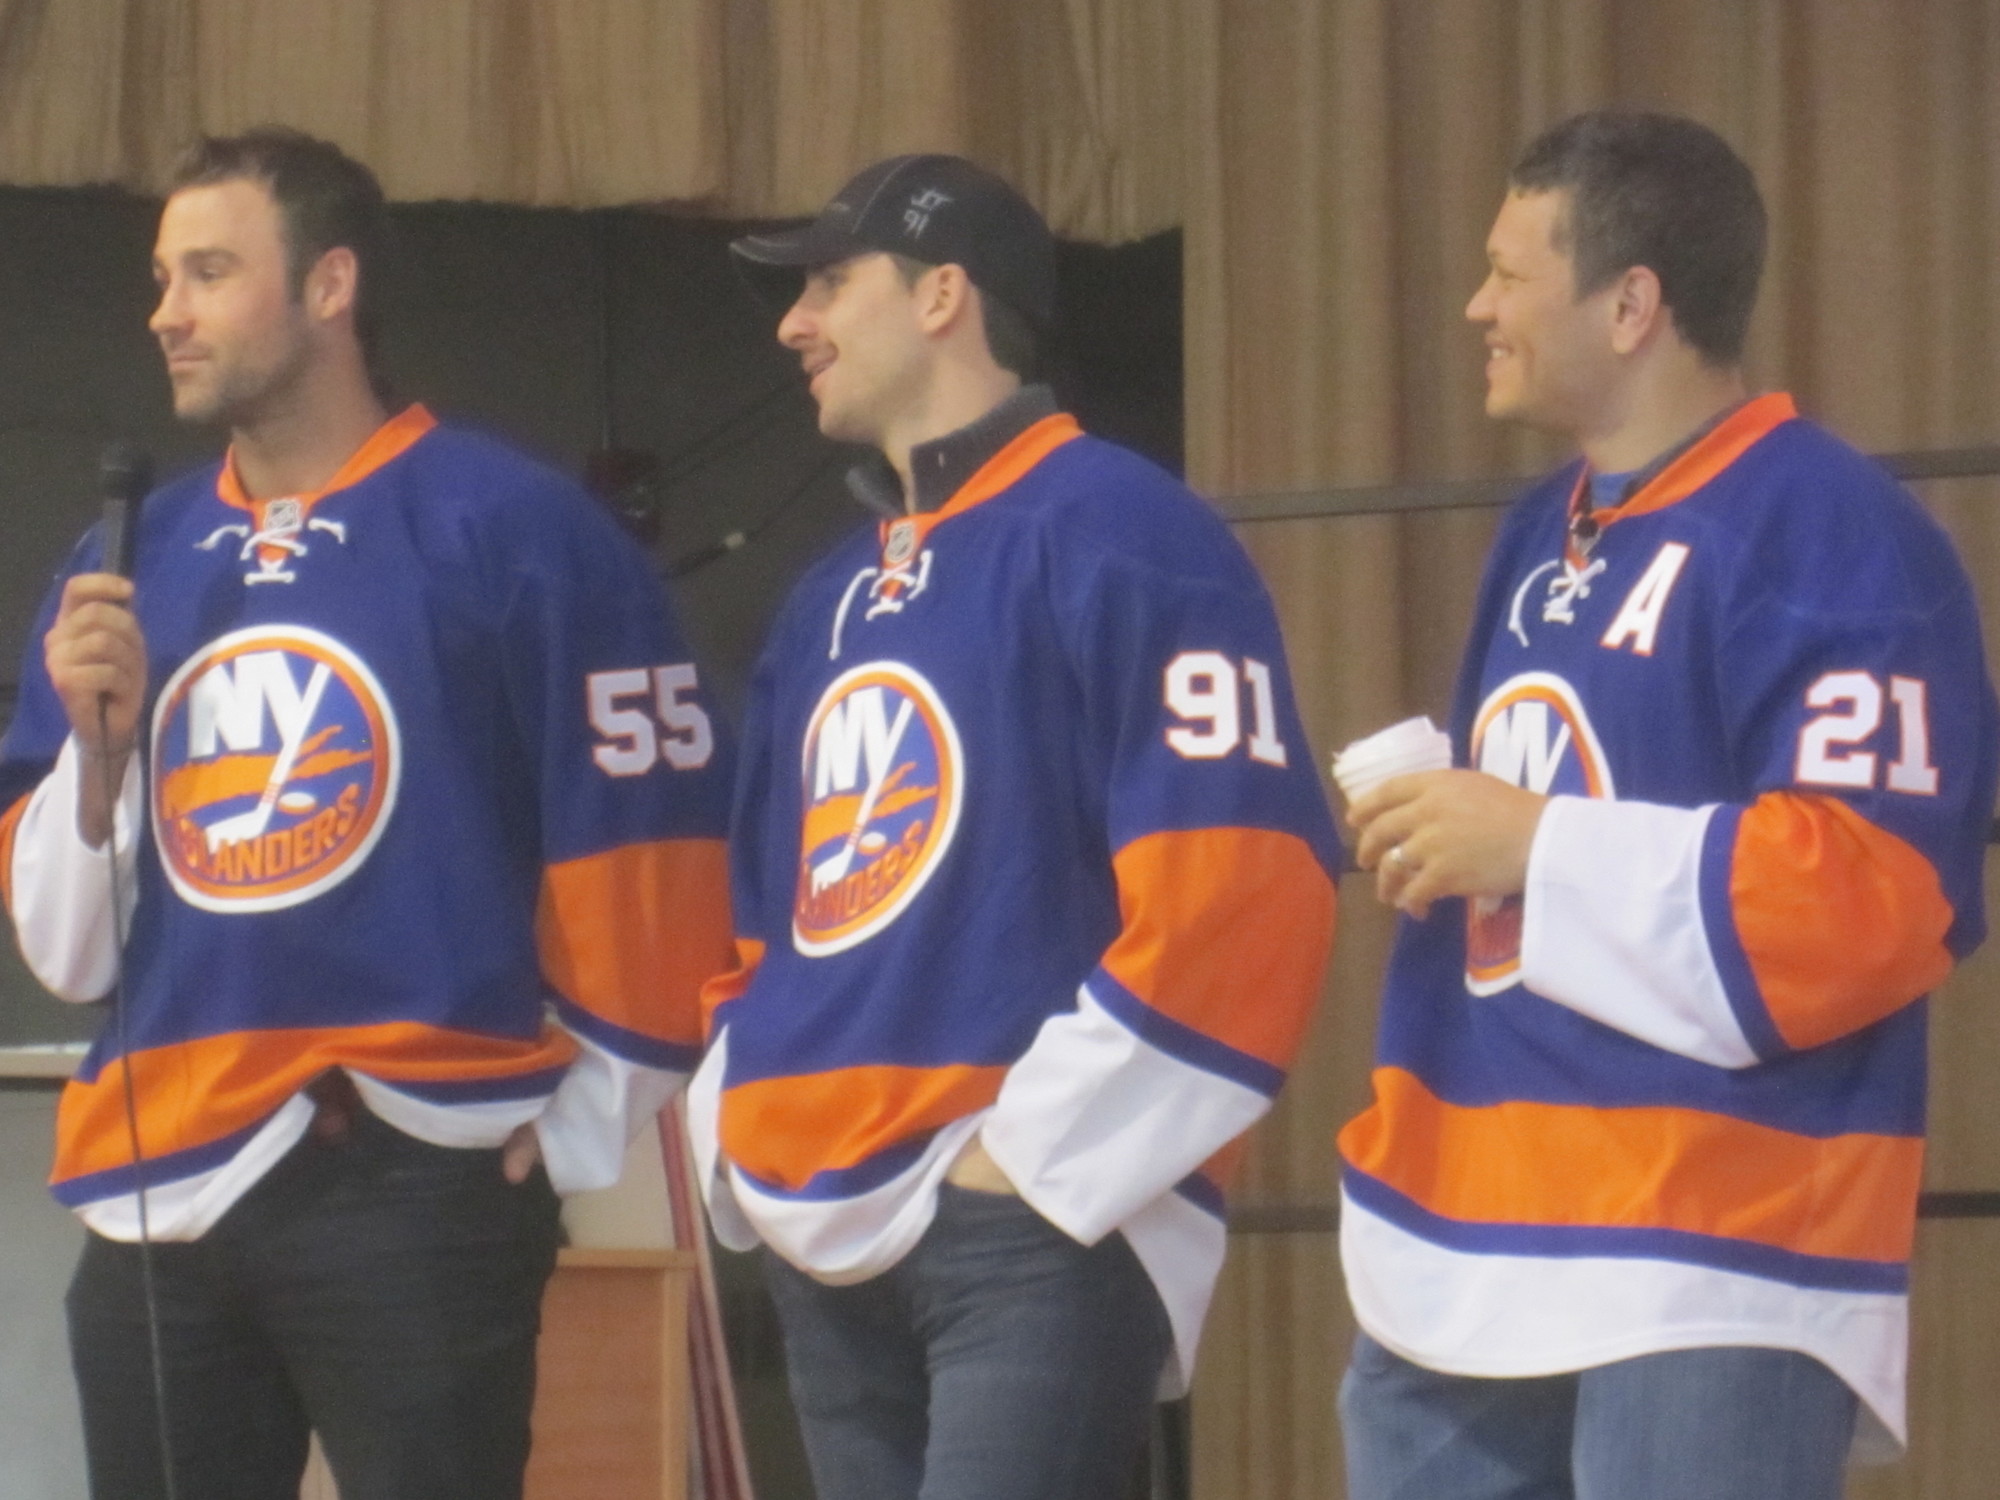 New York Islanders players Johnny Boychuk, John Tavares and Kyle Okposo took part in an assembly on Nov. 19 at Old Mill Road School in North Merrick.